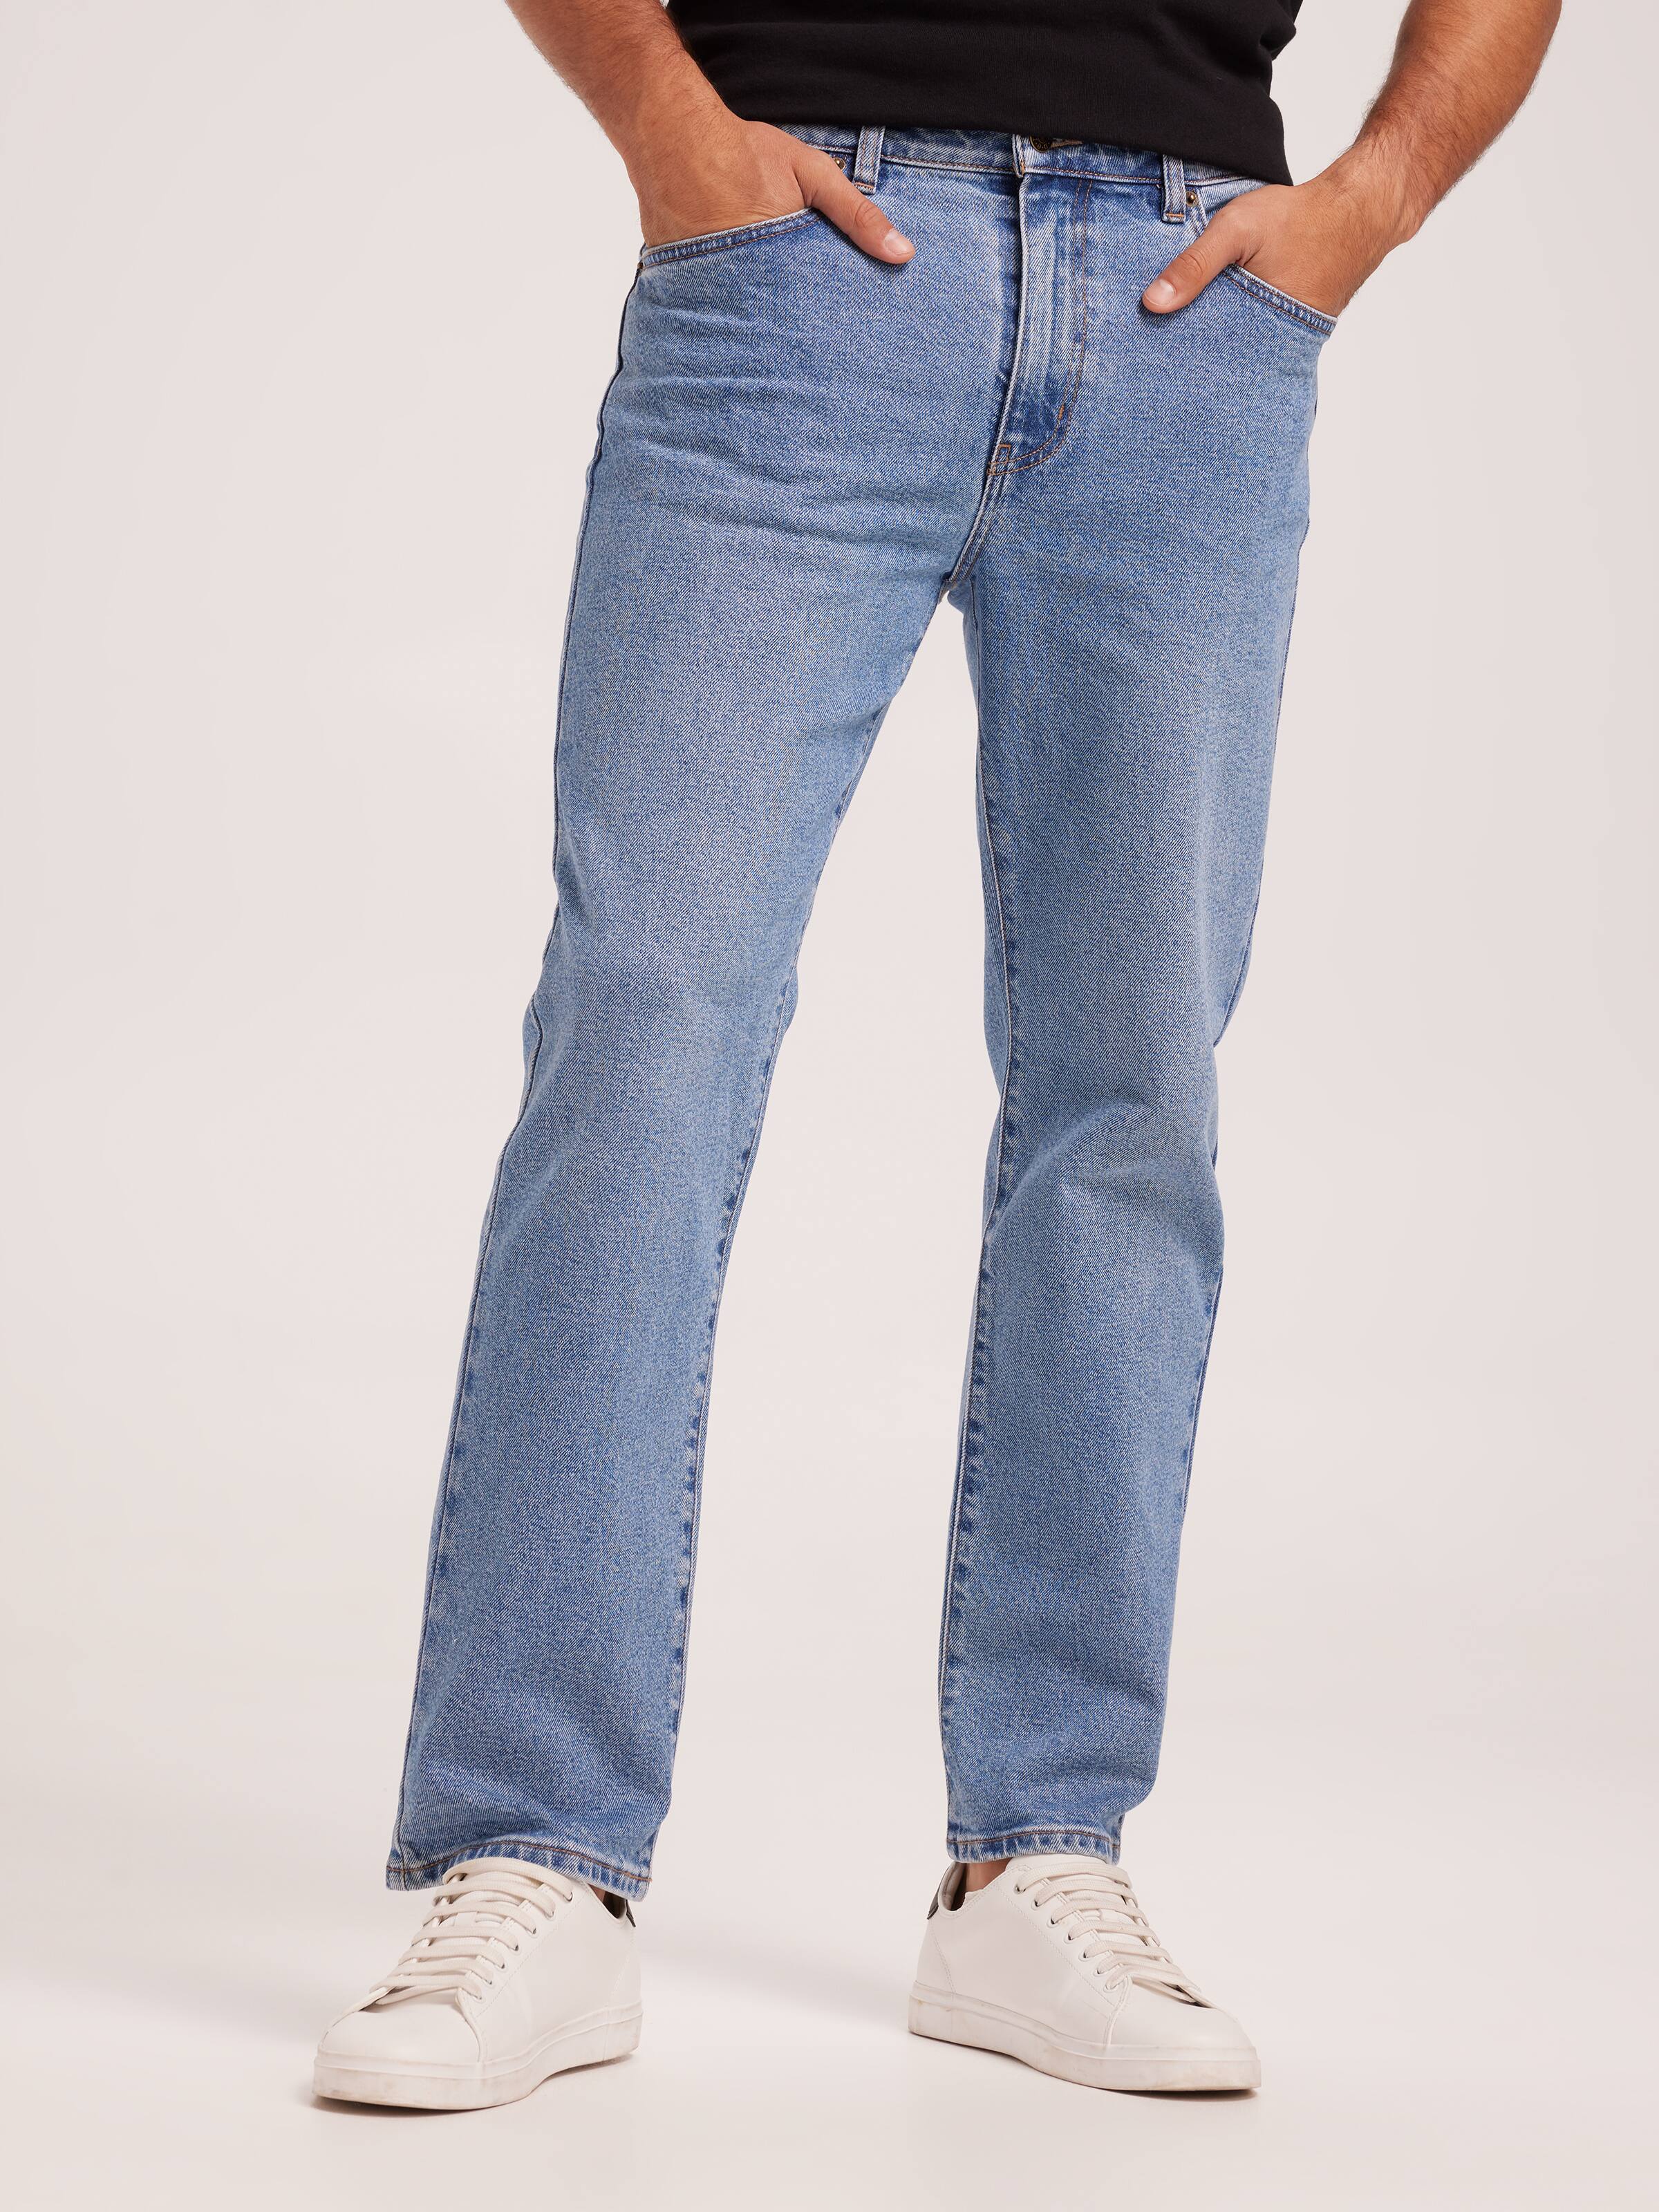 Buy Lee Riders Mens Straight Stretch Jeans (R058023) Stonewash - Riders by  Lee Online Australia